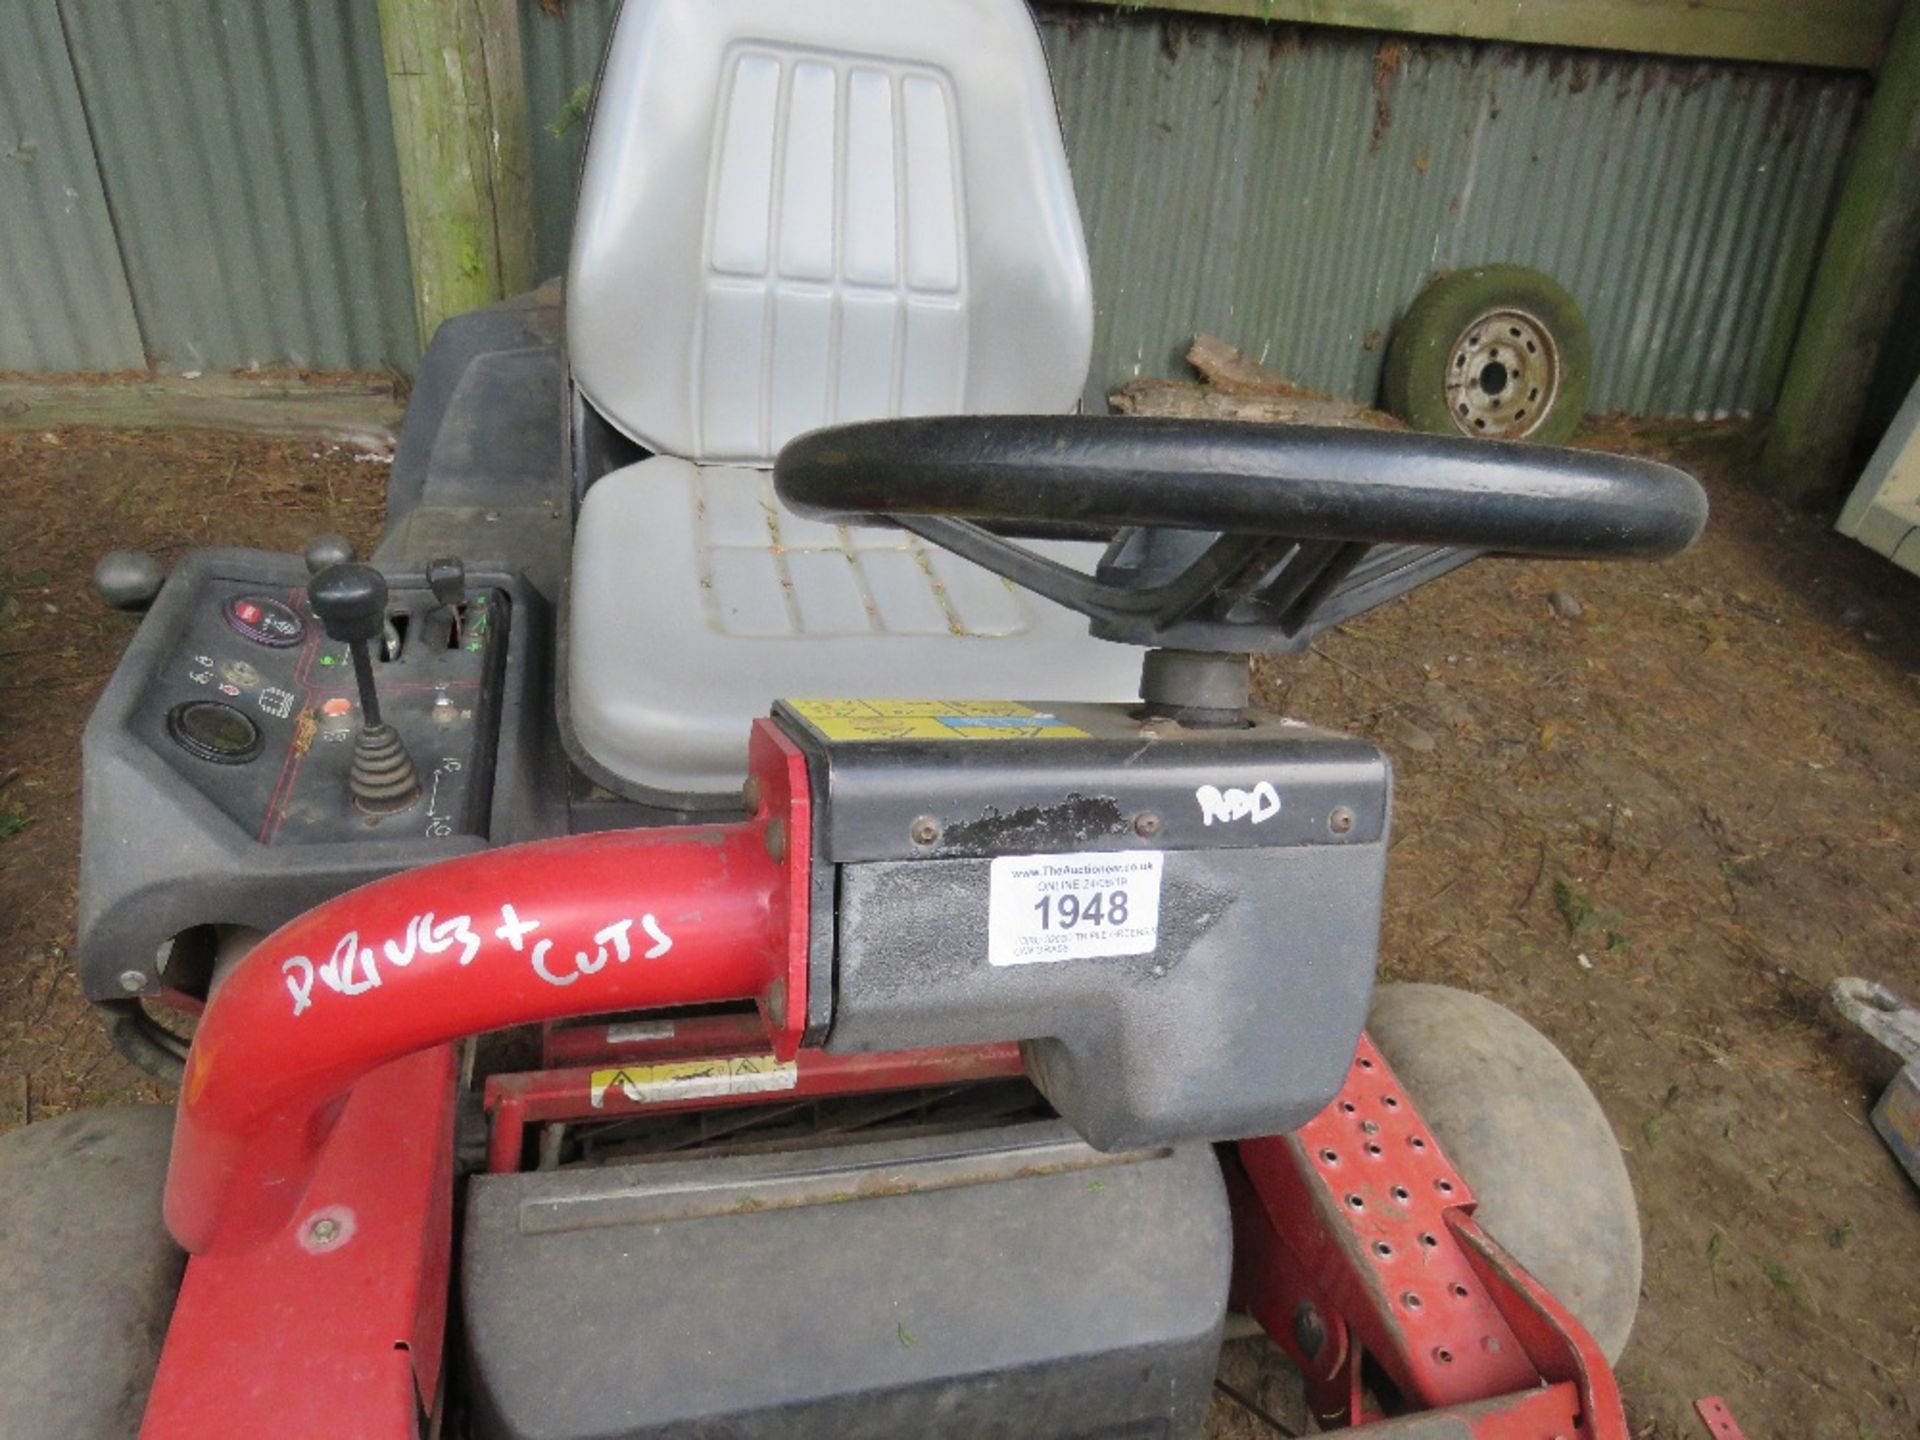 TORO 3200D TRIPLE GREENS MOWER C/W GRASS BOXES WHEN TESTED WAS SEEN TO RUN AND DRIVE - Image 2 of 3